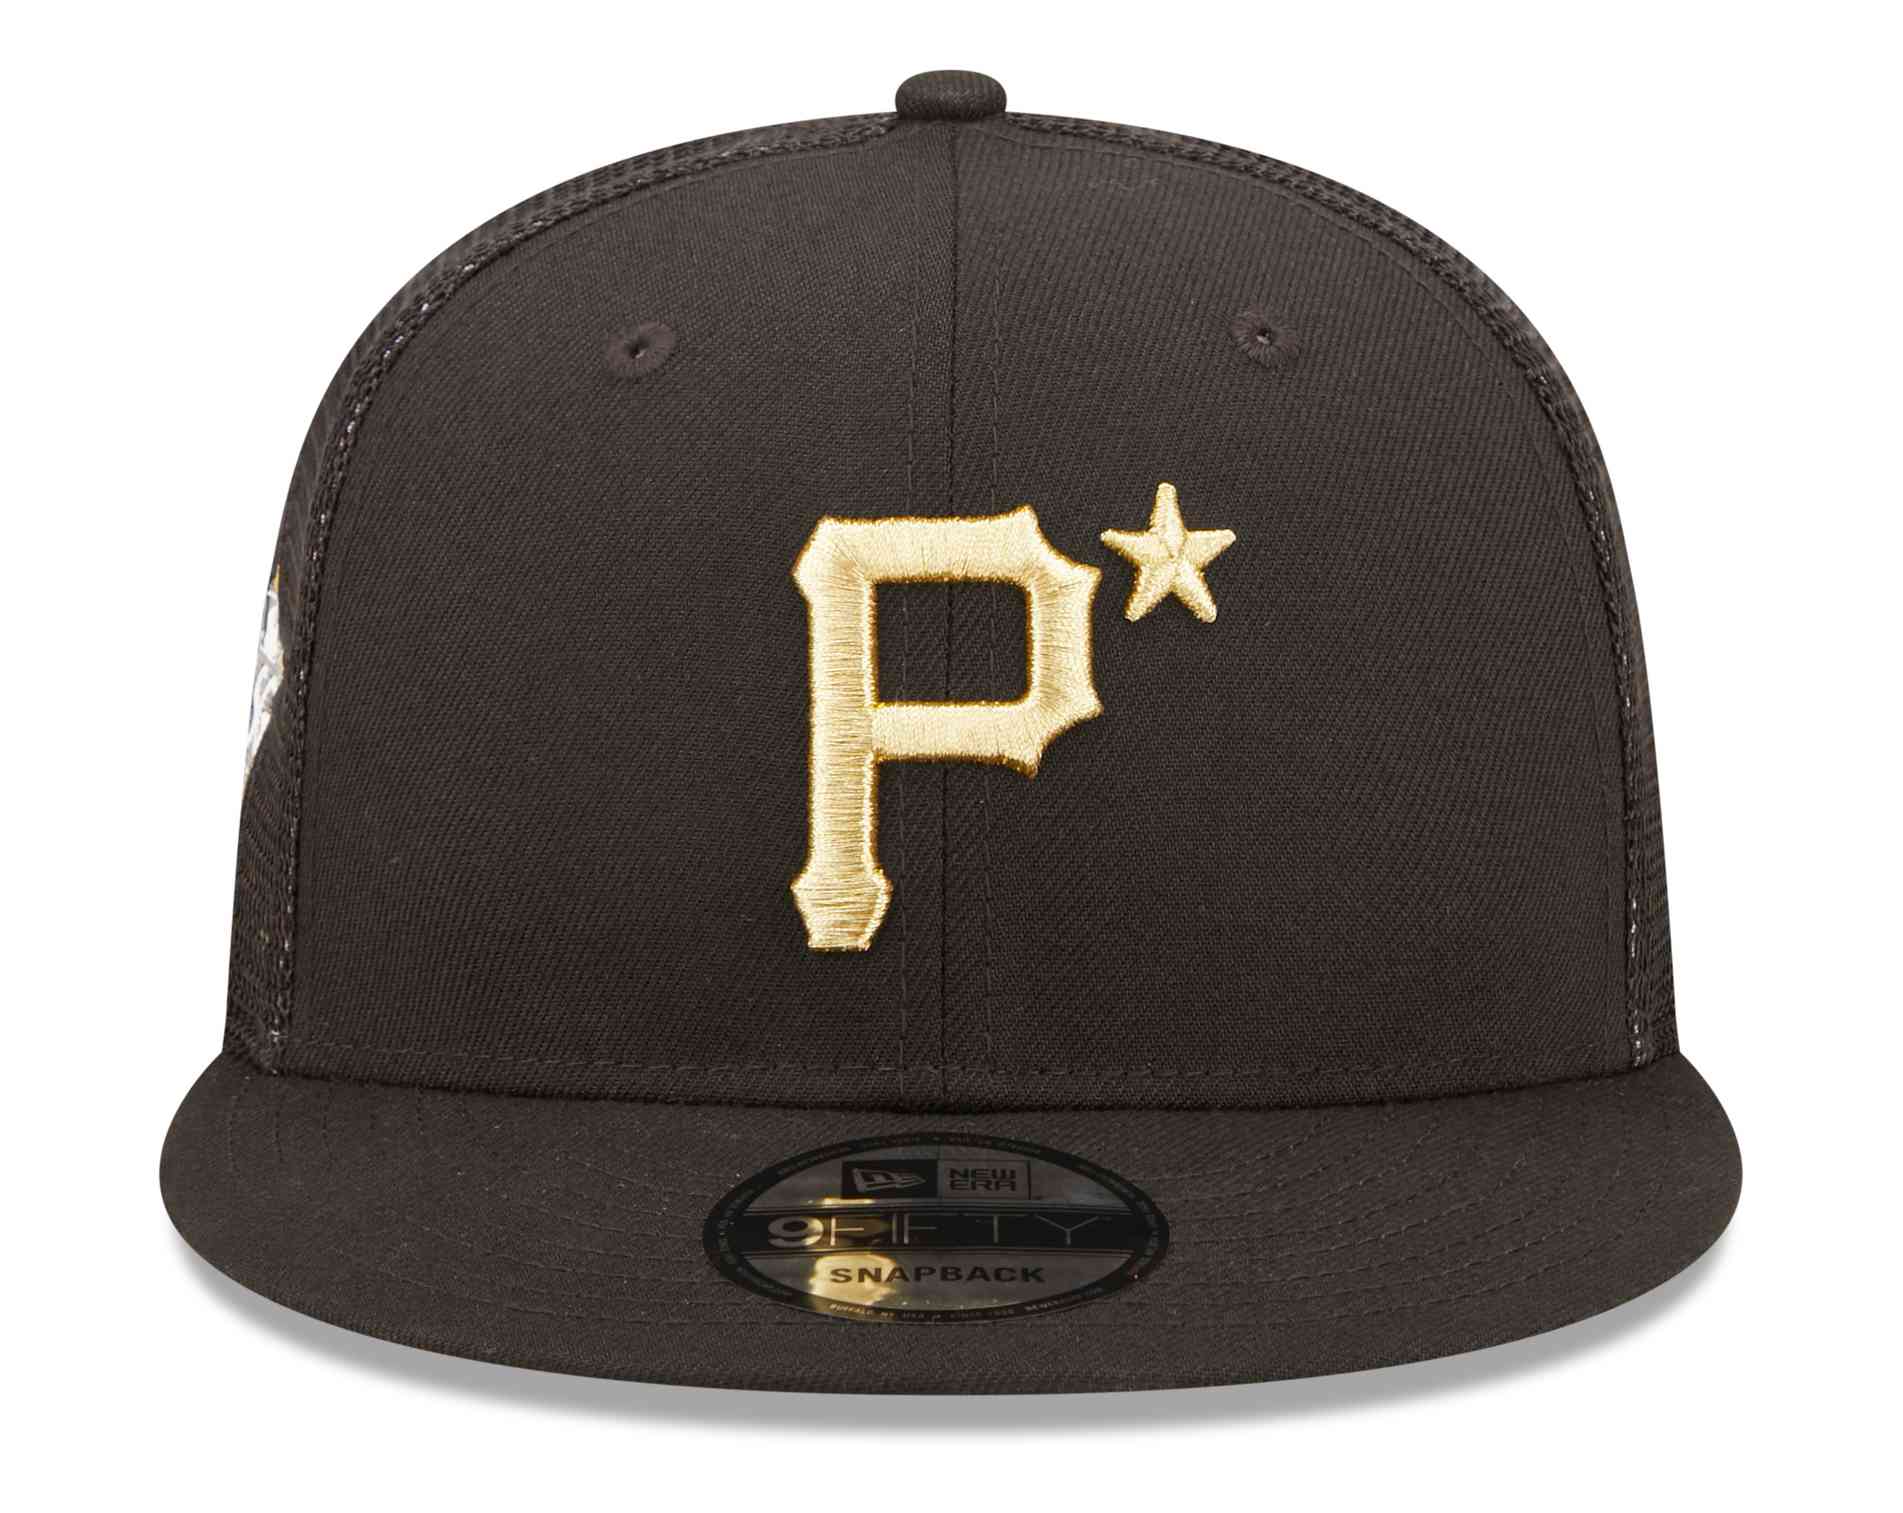 New Era - MLB Pittsburgh Pirates All Star Game Patch 9Fifty